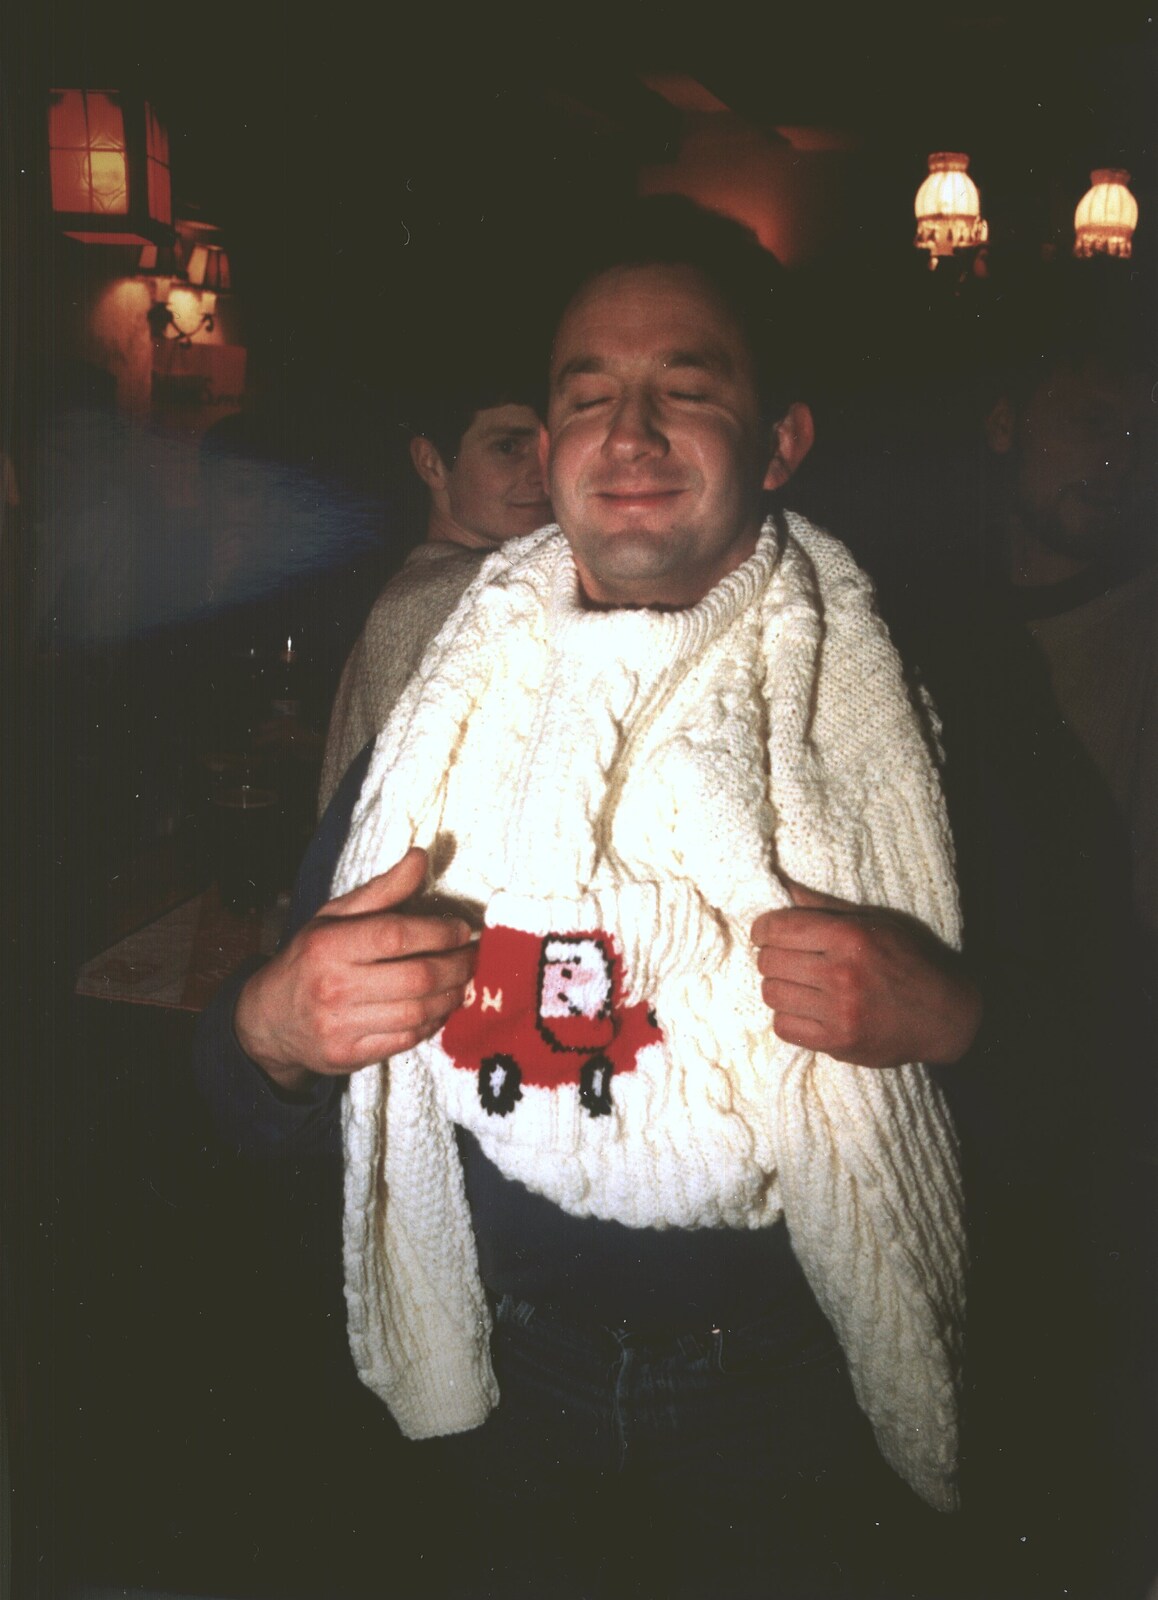 DH tries on his new knitted jumper from Brome Swan Christmas, Suffolk - December 1998